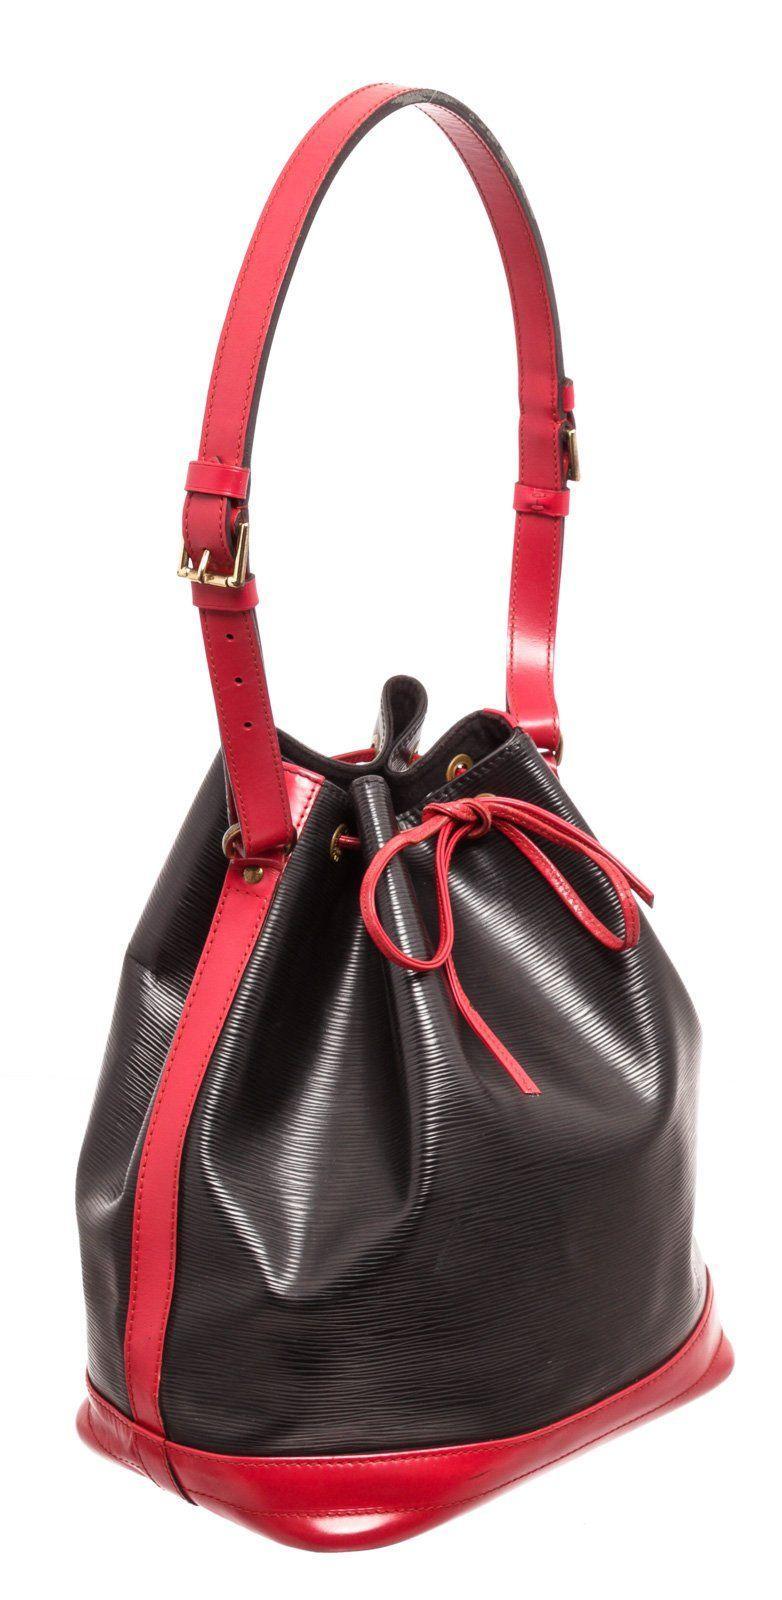 Louis Vuitton Red Black Epi Leather Handbags with silver-tone hardware, tan vachetta leather trim, leather shoulder strap, and drawstring closure.

26203MSC


Measurements:
	Length: 10 in / 25 cm
	Width: 7.5 in / 19 cm
	13 in / 33 cm
CONDITION: